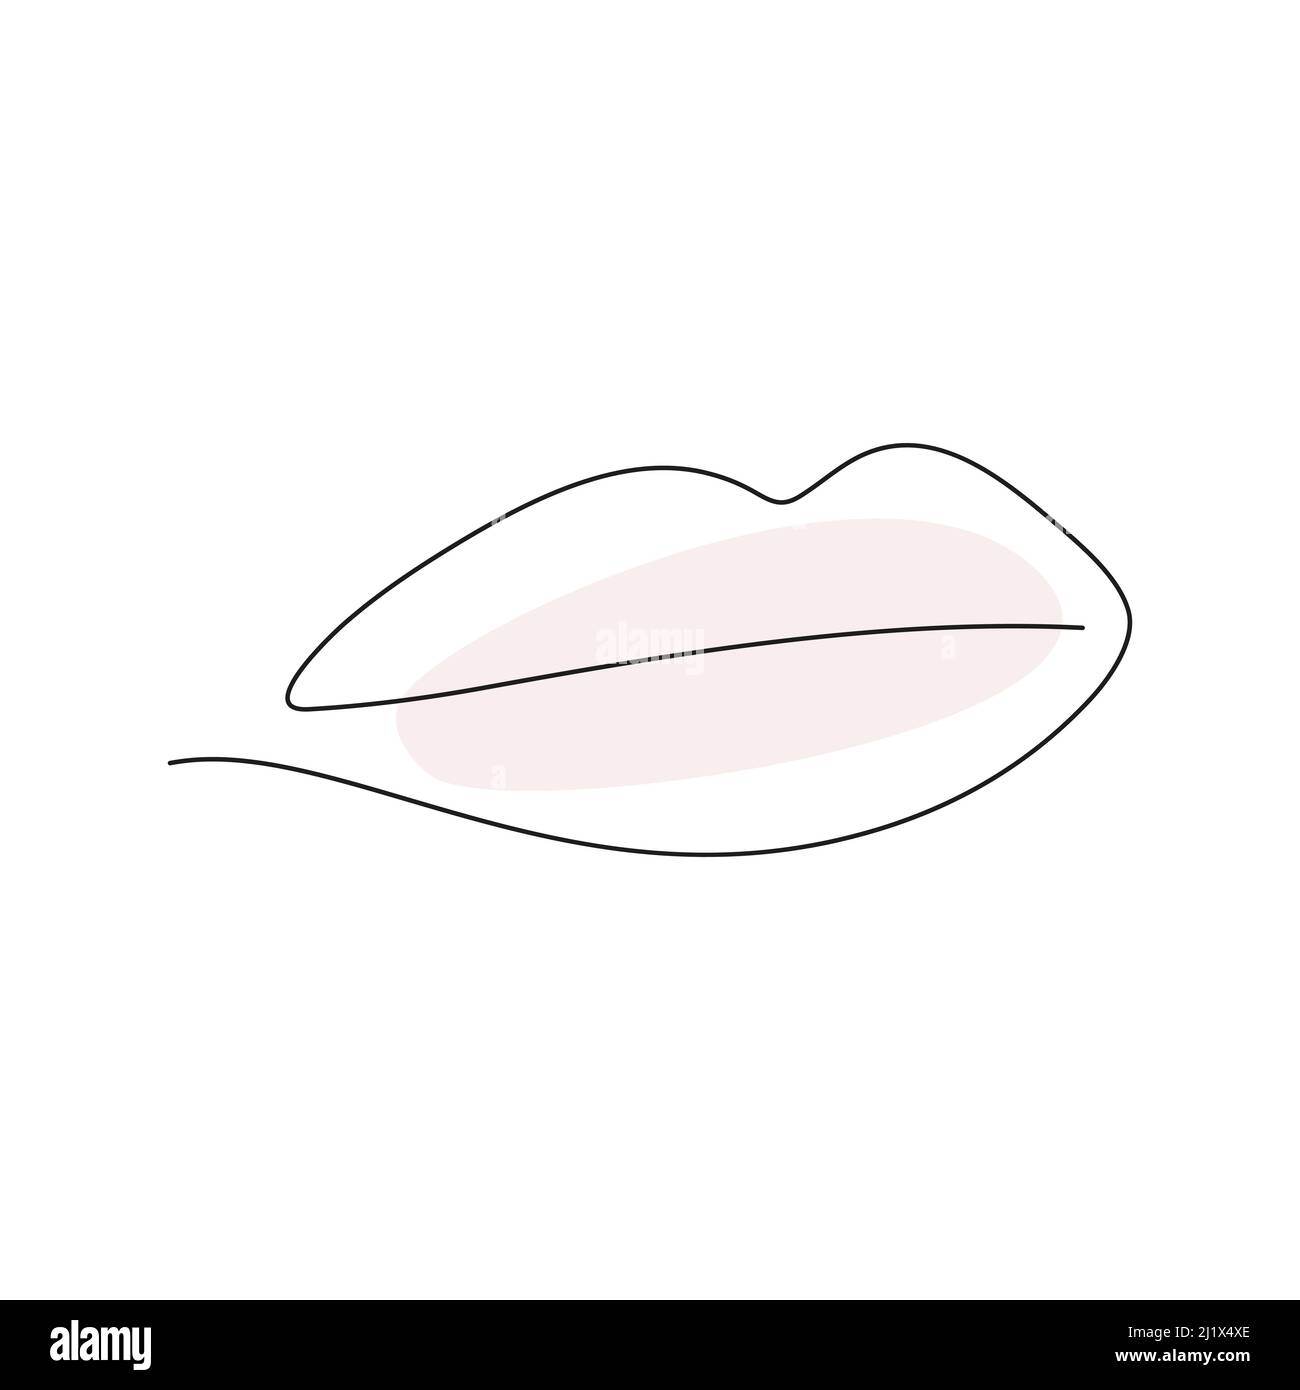 Continuous one line lips with pink shape. Modern minimal linear female lips. Line art kiss symbol. Stock Vector